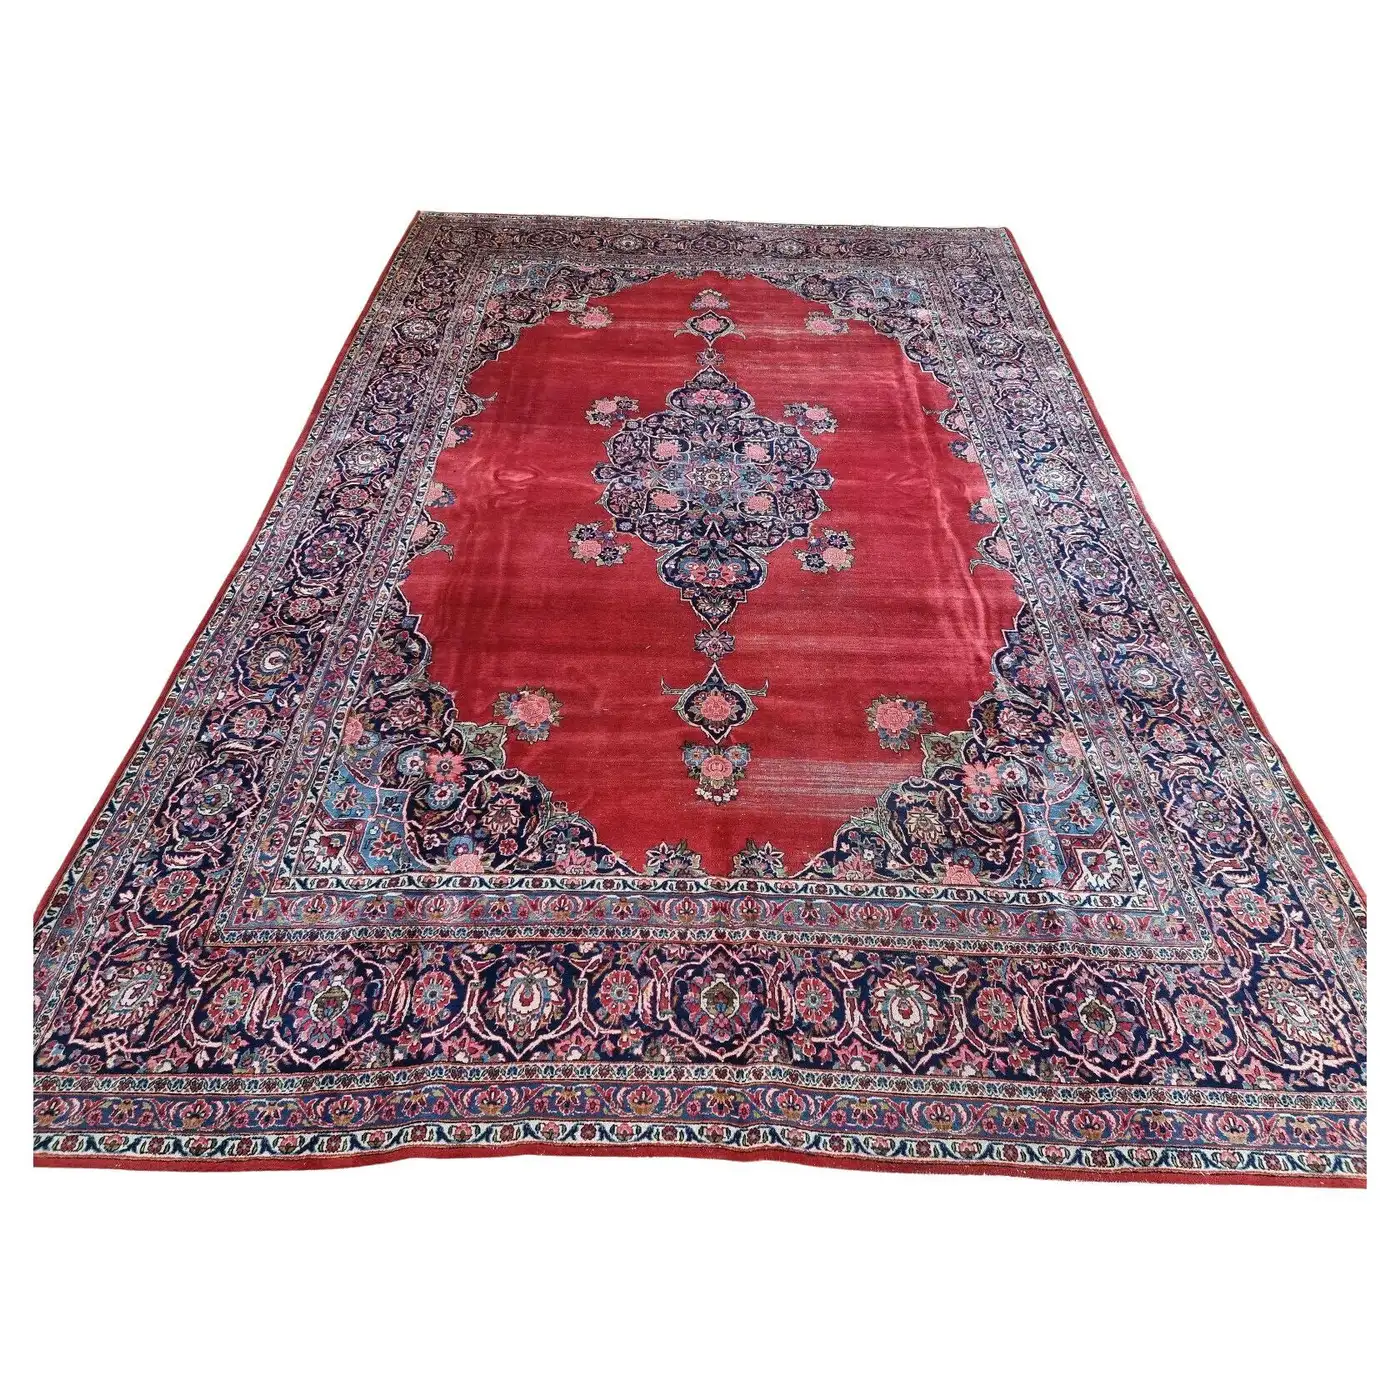 Handmade Antique Persian Kashan Distressed Rug - Front View - 8.5' x 12.9' - 1920s